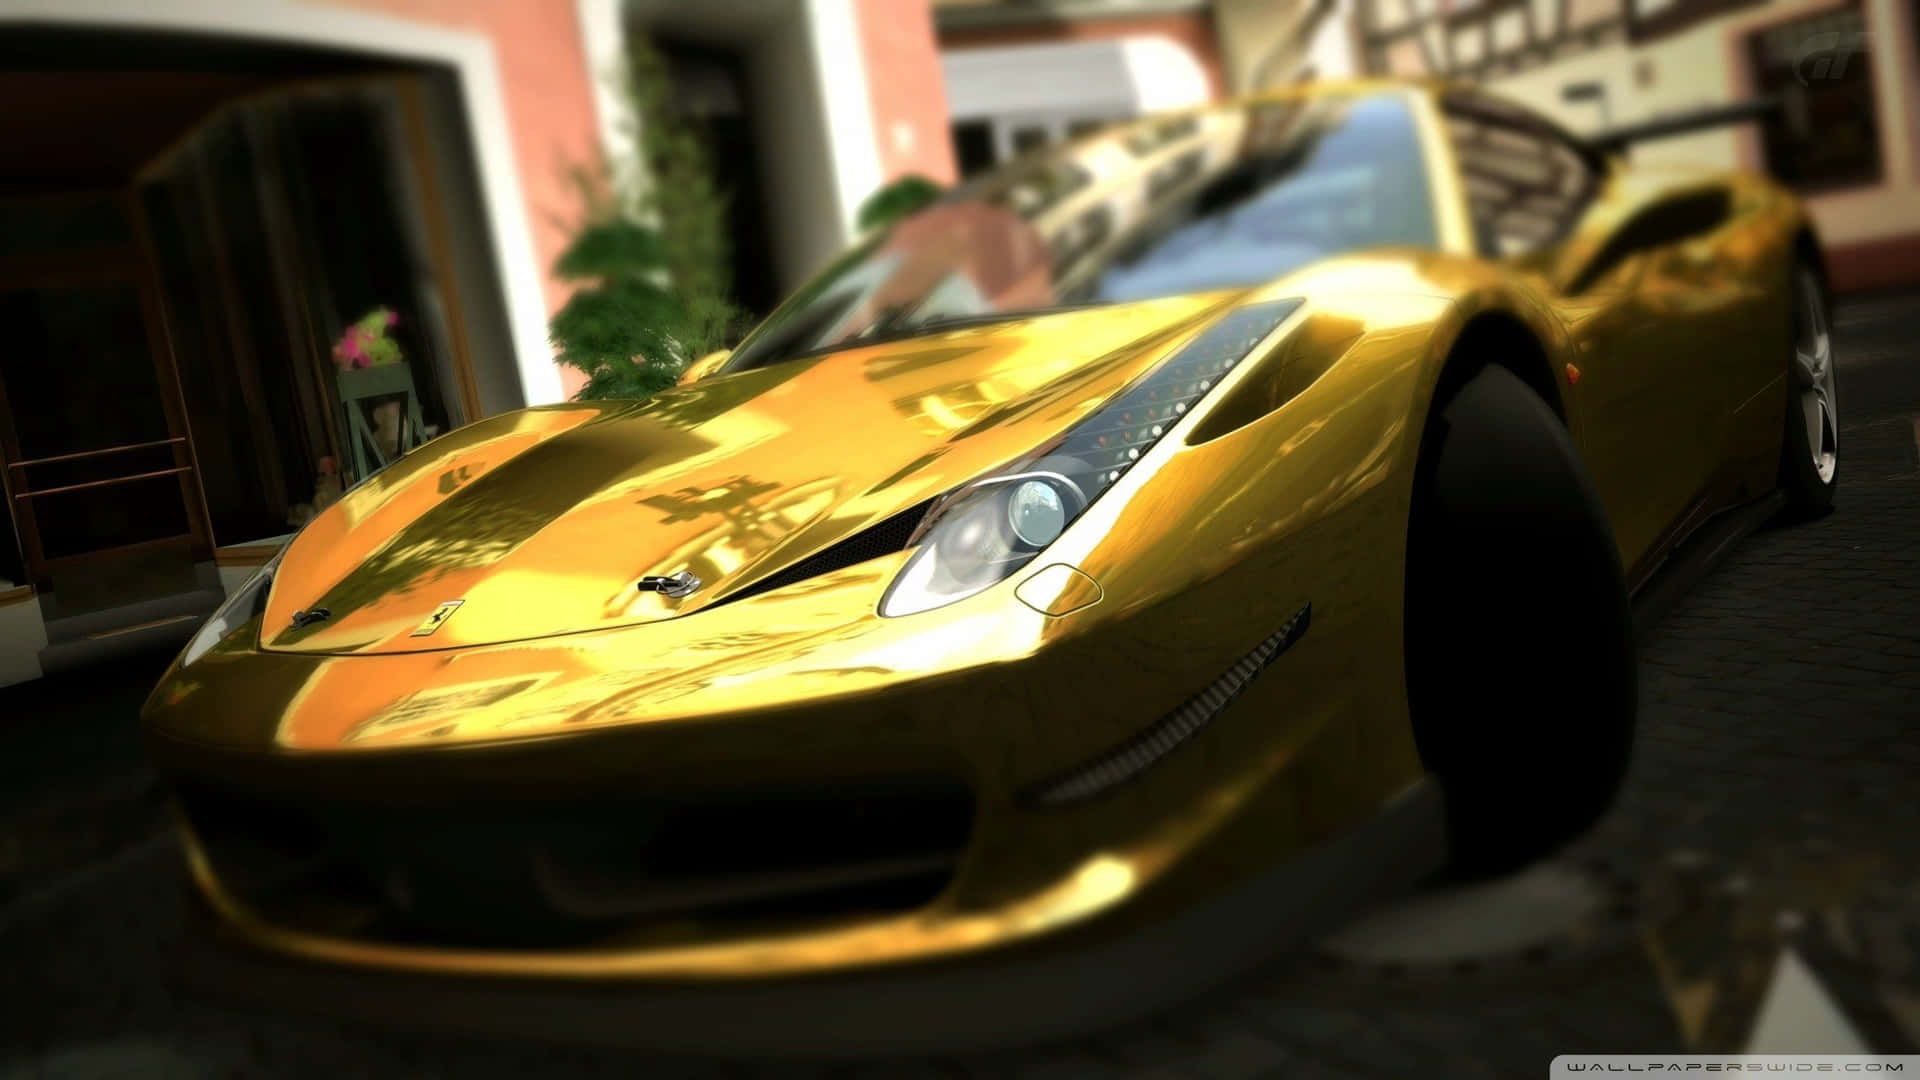 High-performance Gold Cars Shine Bright Background